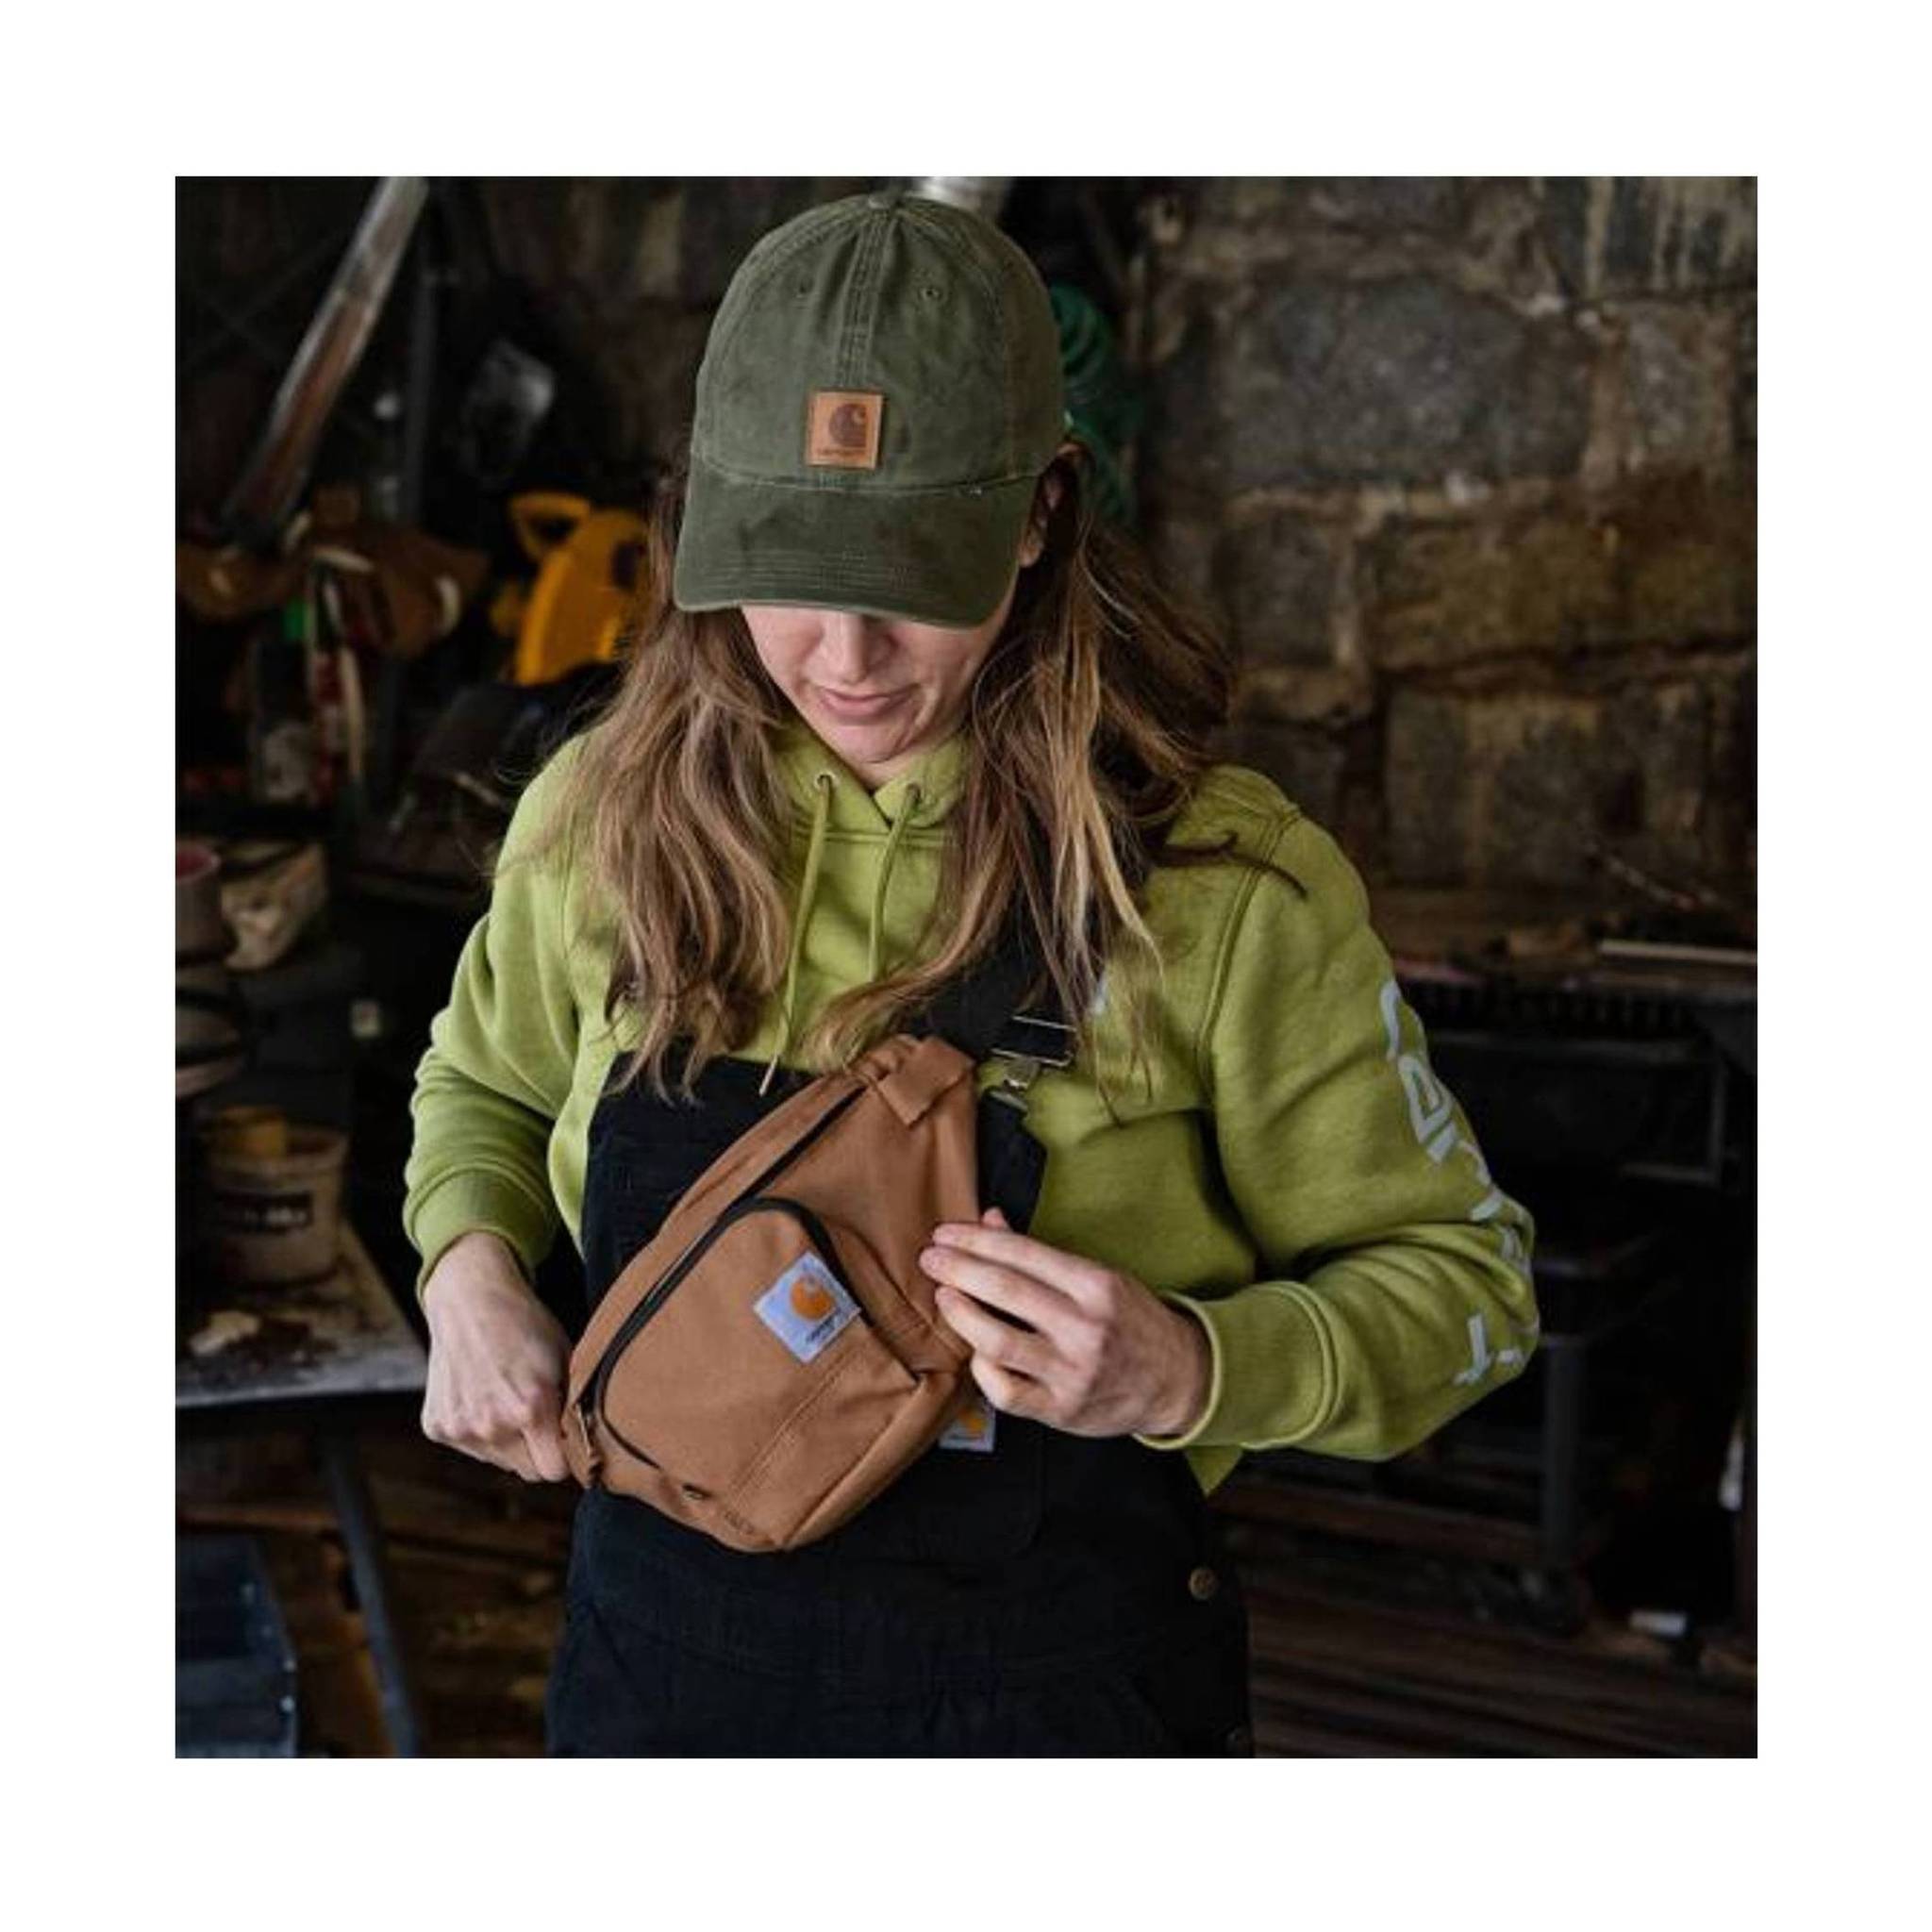 carhartt Waist Pack Available Now In 3 colors, Brown / Black